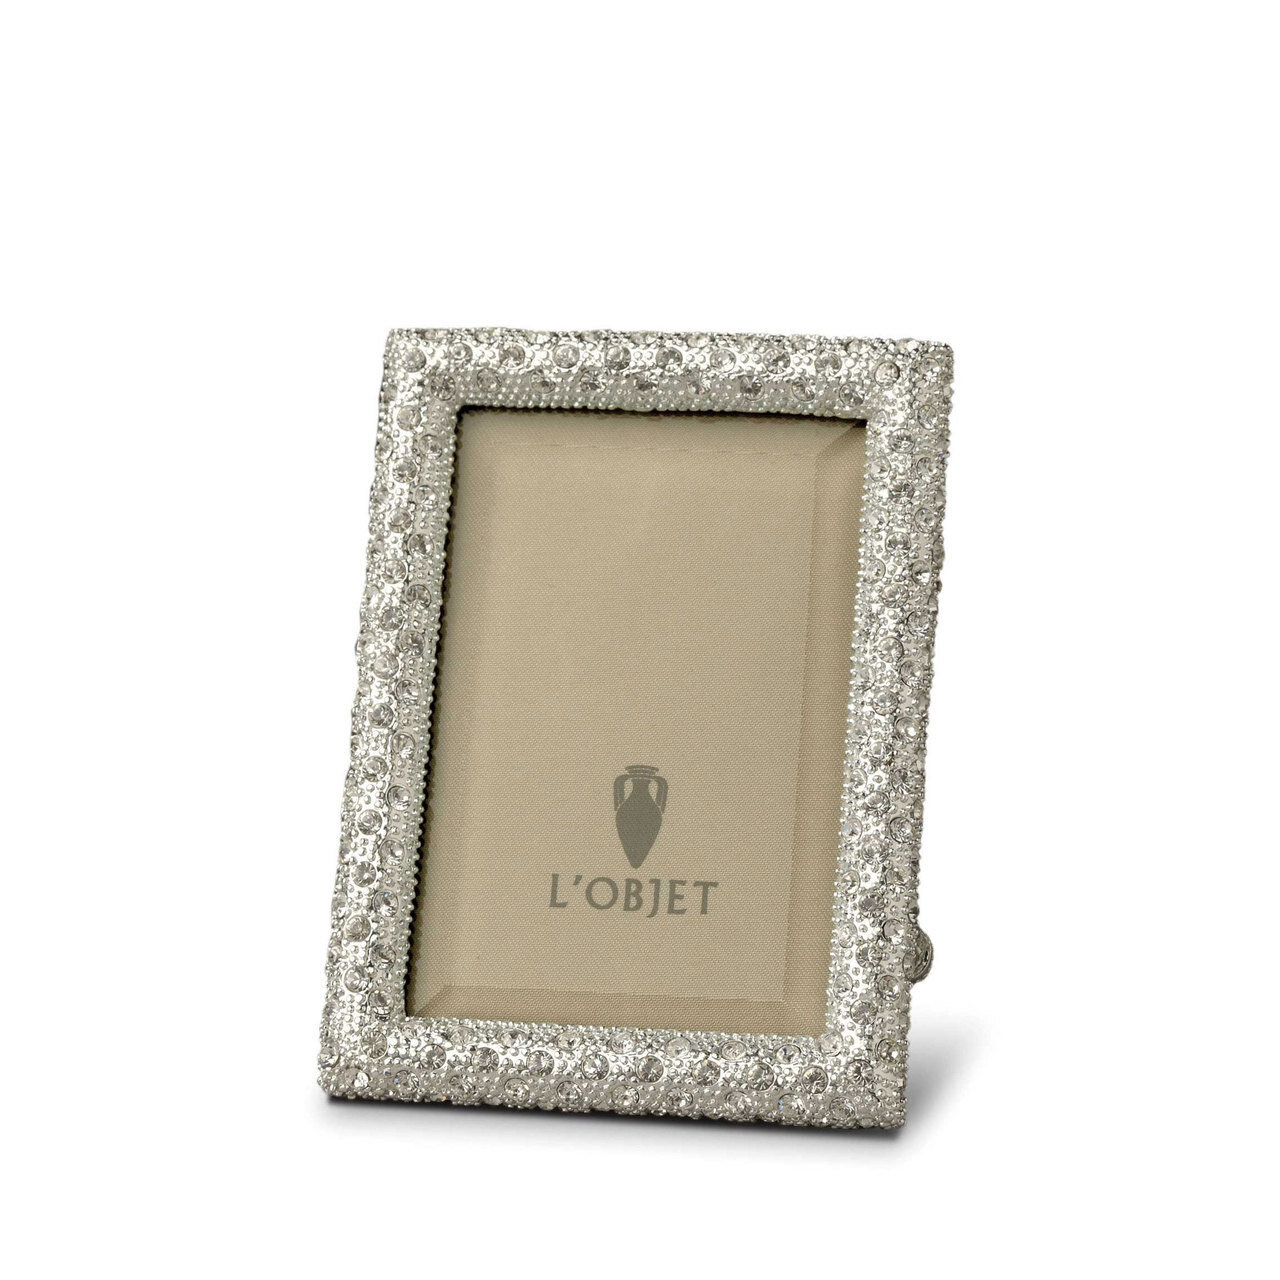 L'Objet Rectangular Pave 2 x 3 Inch Platinum with White Crystals Picture Frame